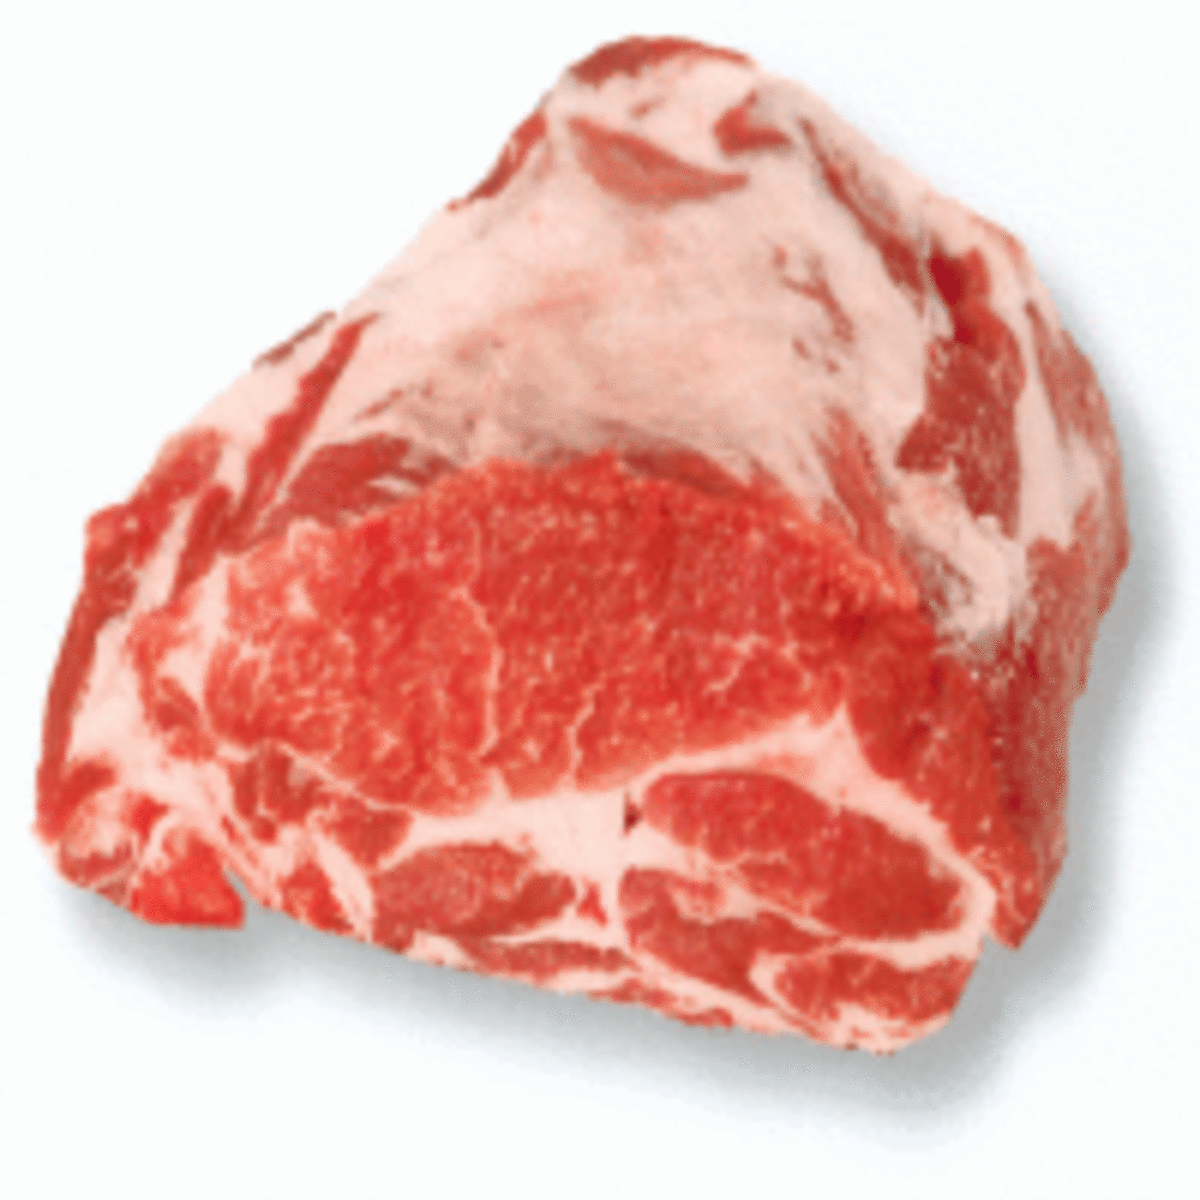 Pork neck. Use this cut for the best BBQ pork chops you've ever had!